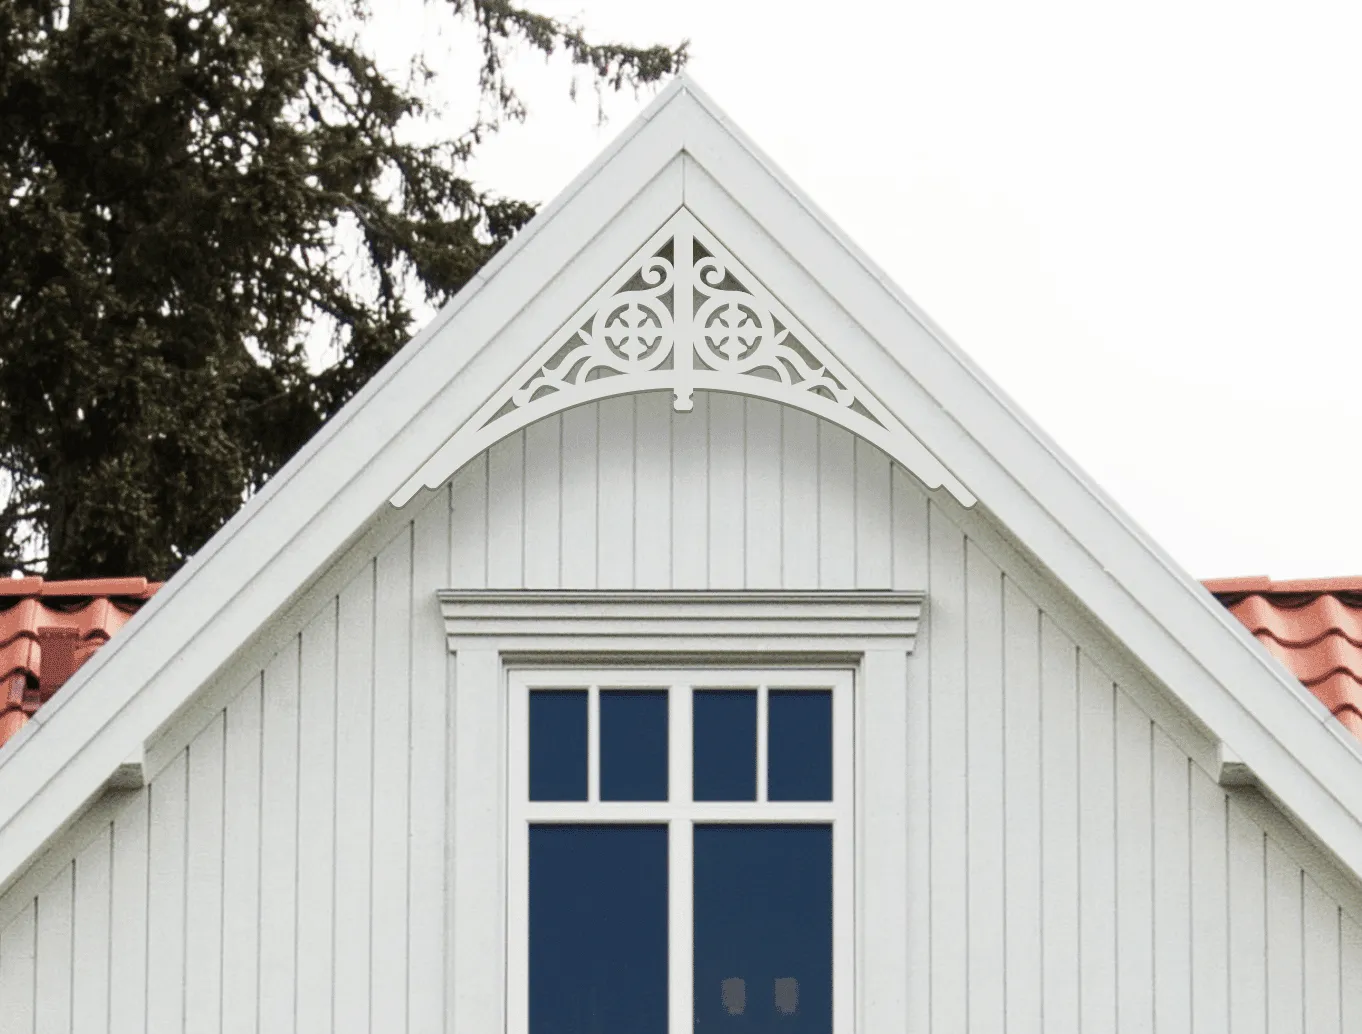 Gable pediment 004 - A white house with decorative wooden victorian millwork as house decoration for roof and gable end.